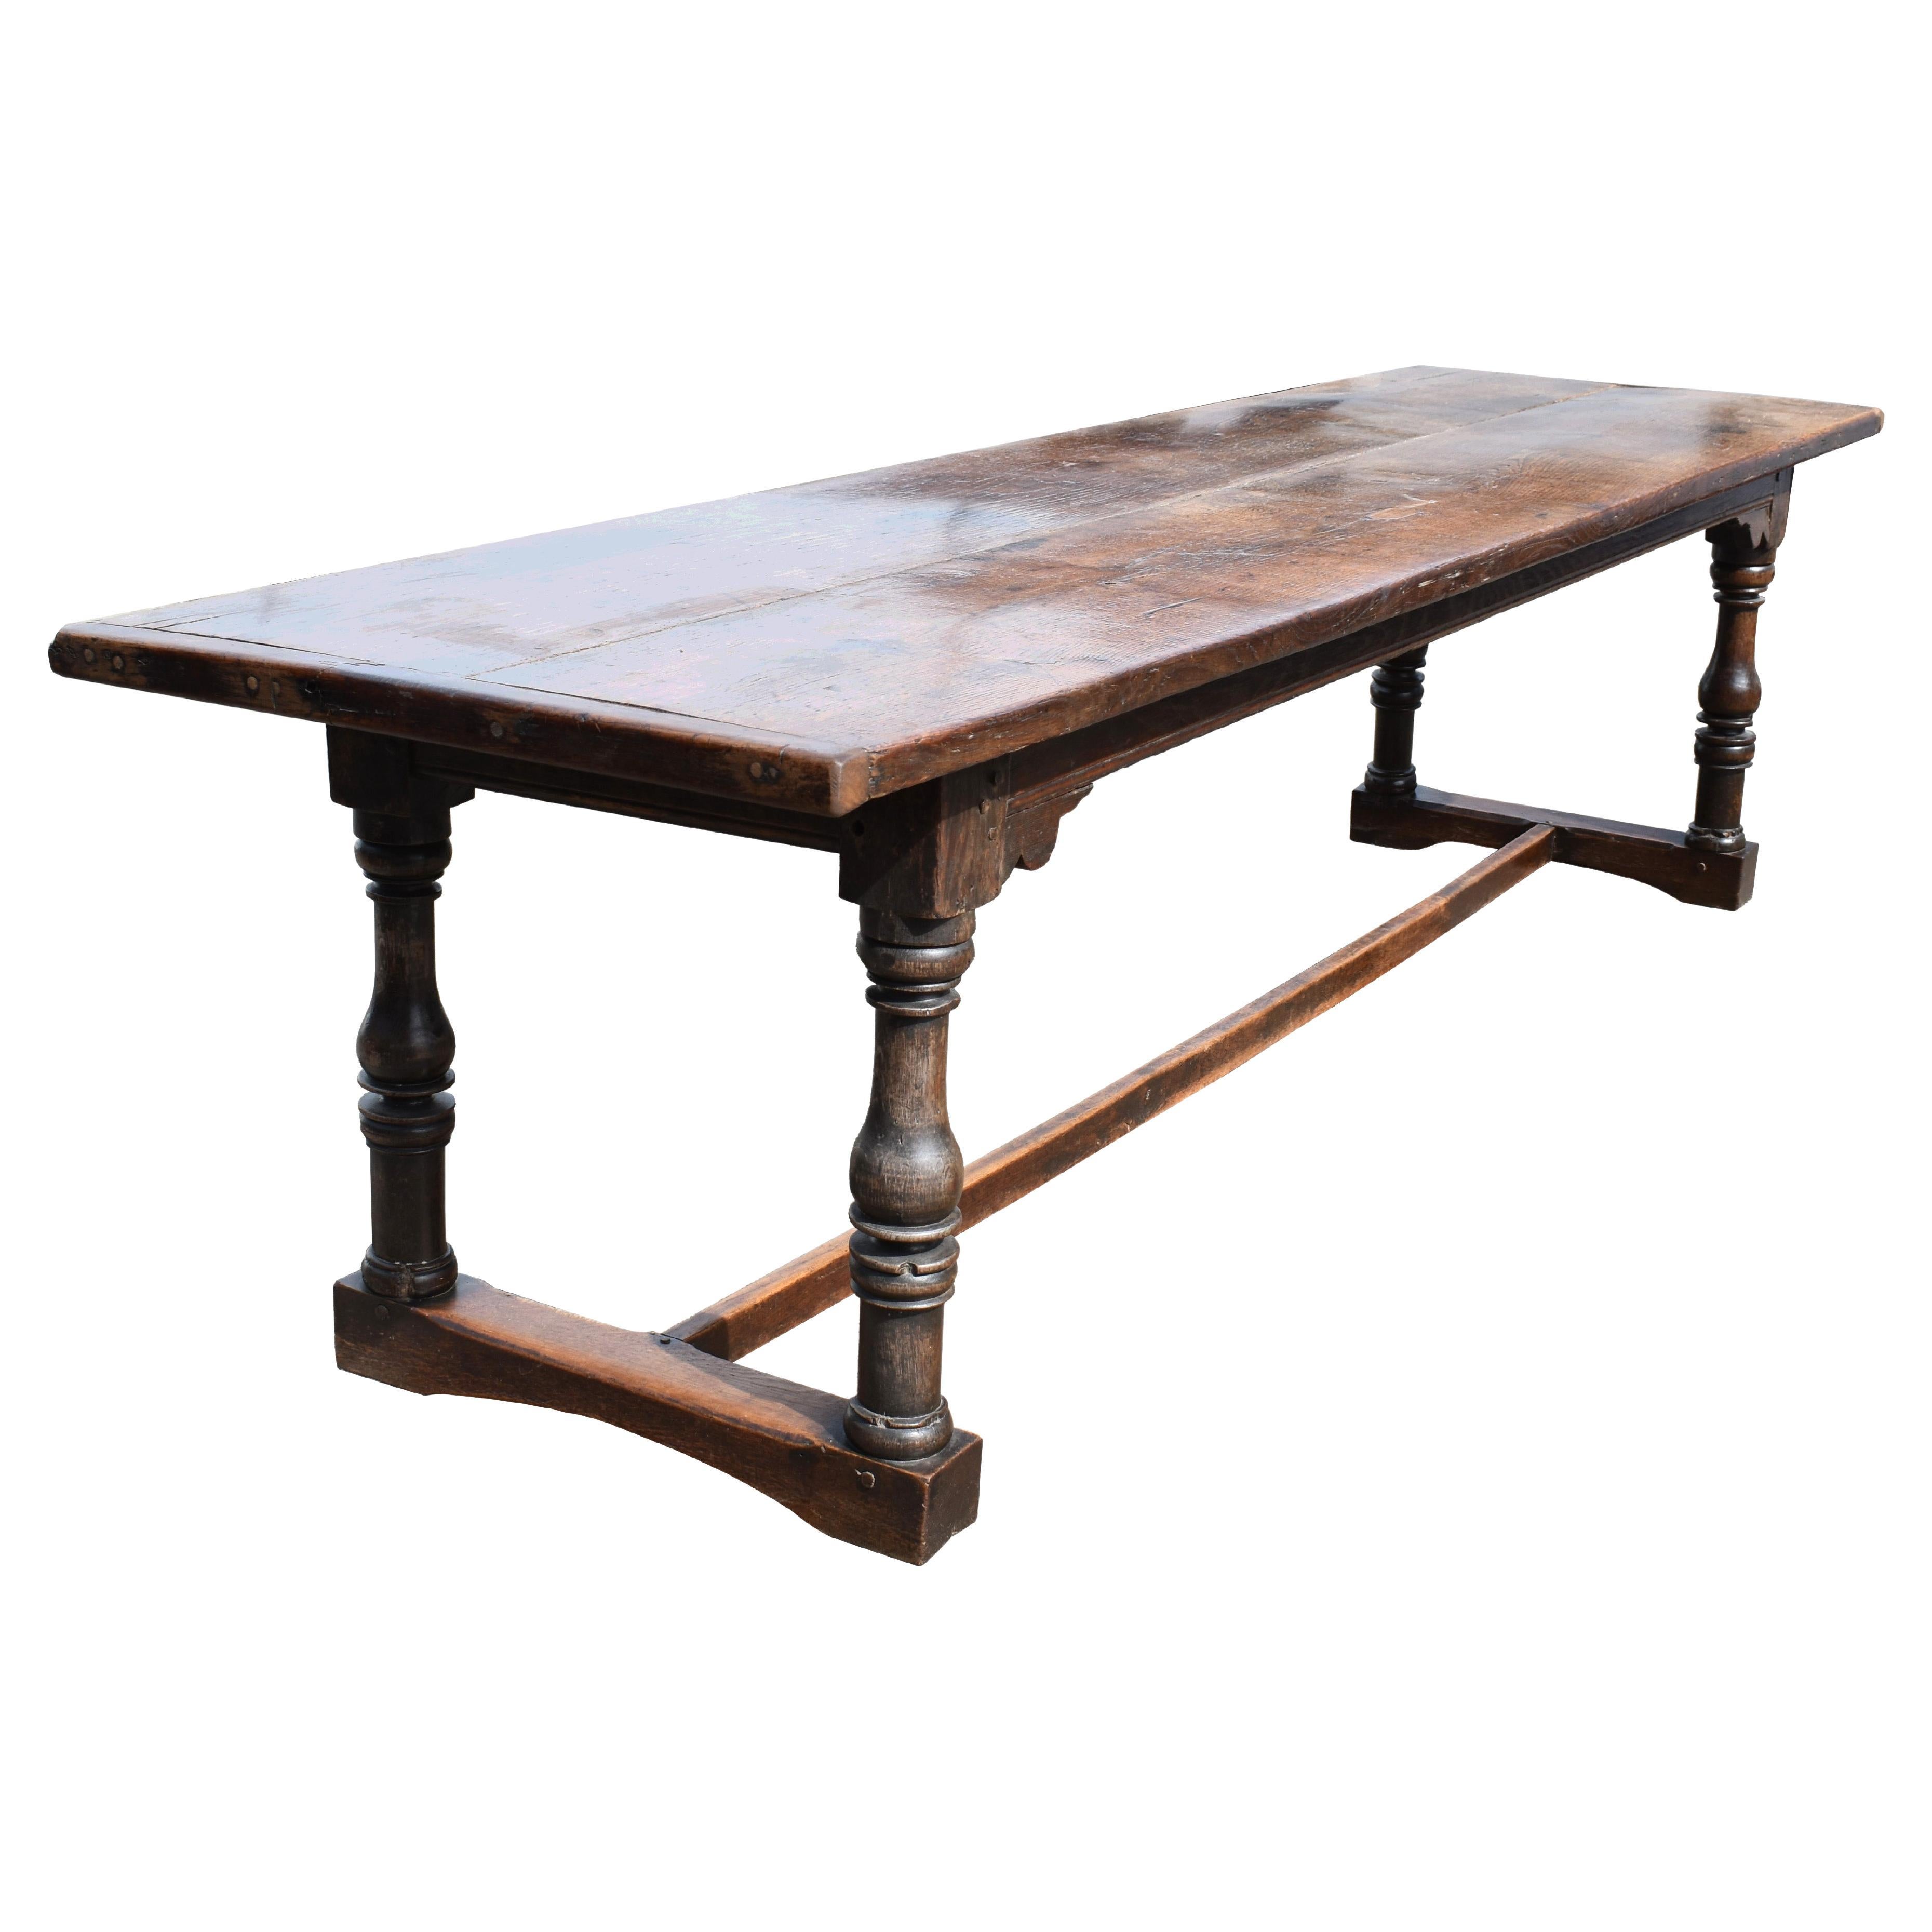 17th Century English Solid Oak Refectory Table